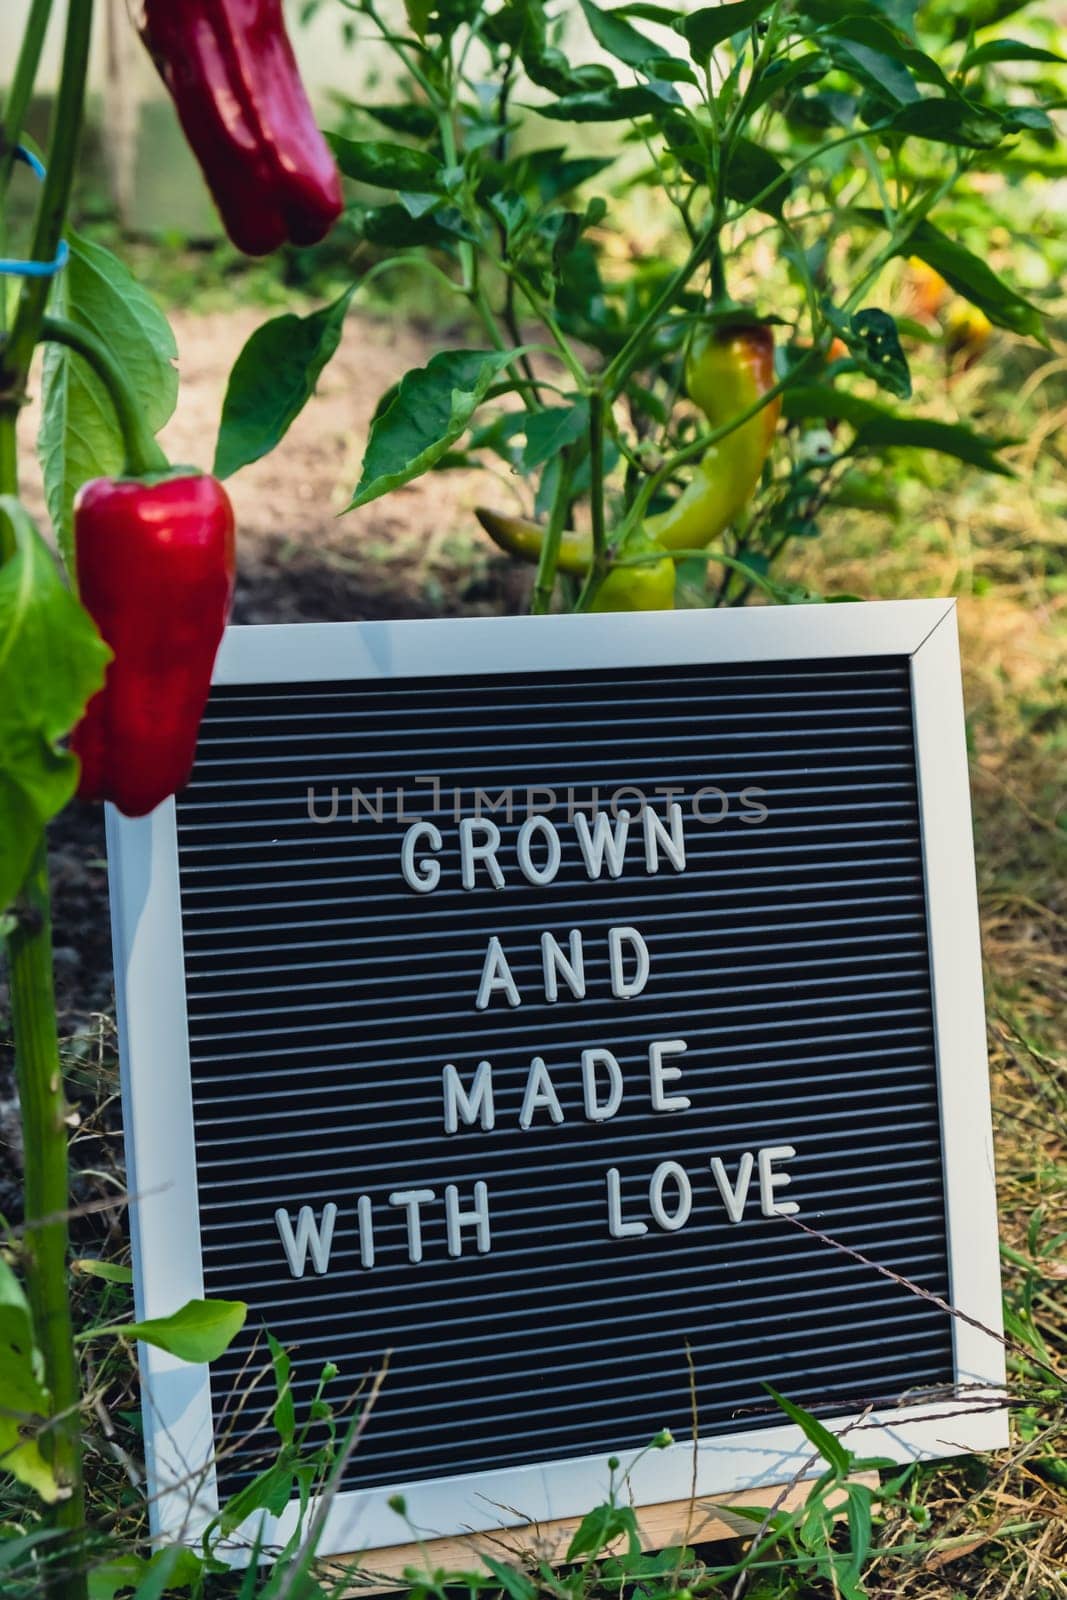 GROWN AND MADE WITH LOVE message on background of fresh eco-friendly bio grown bell pepper in garden. Countryside food production concept. Locally produce harvesting. Sustainability and responsibility